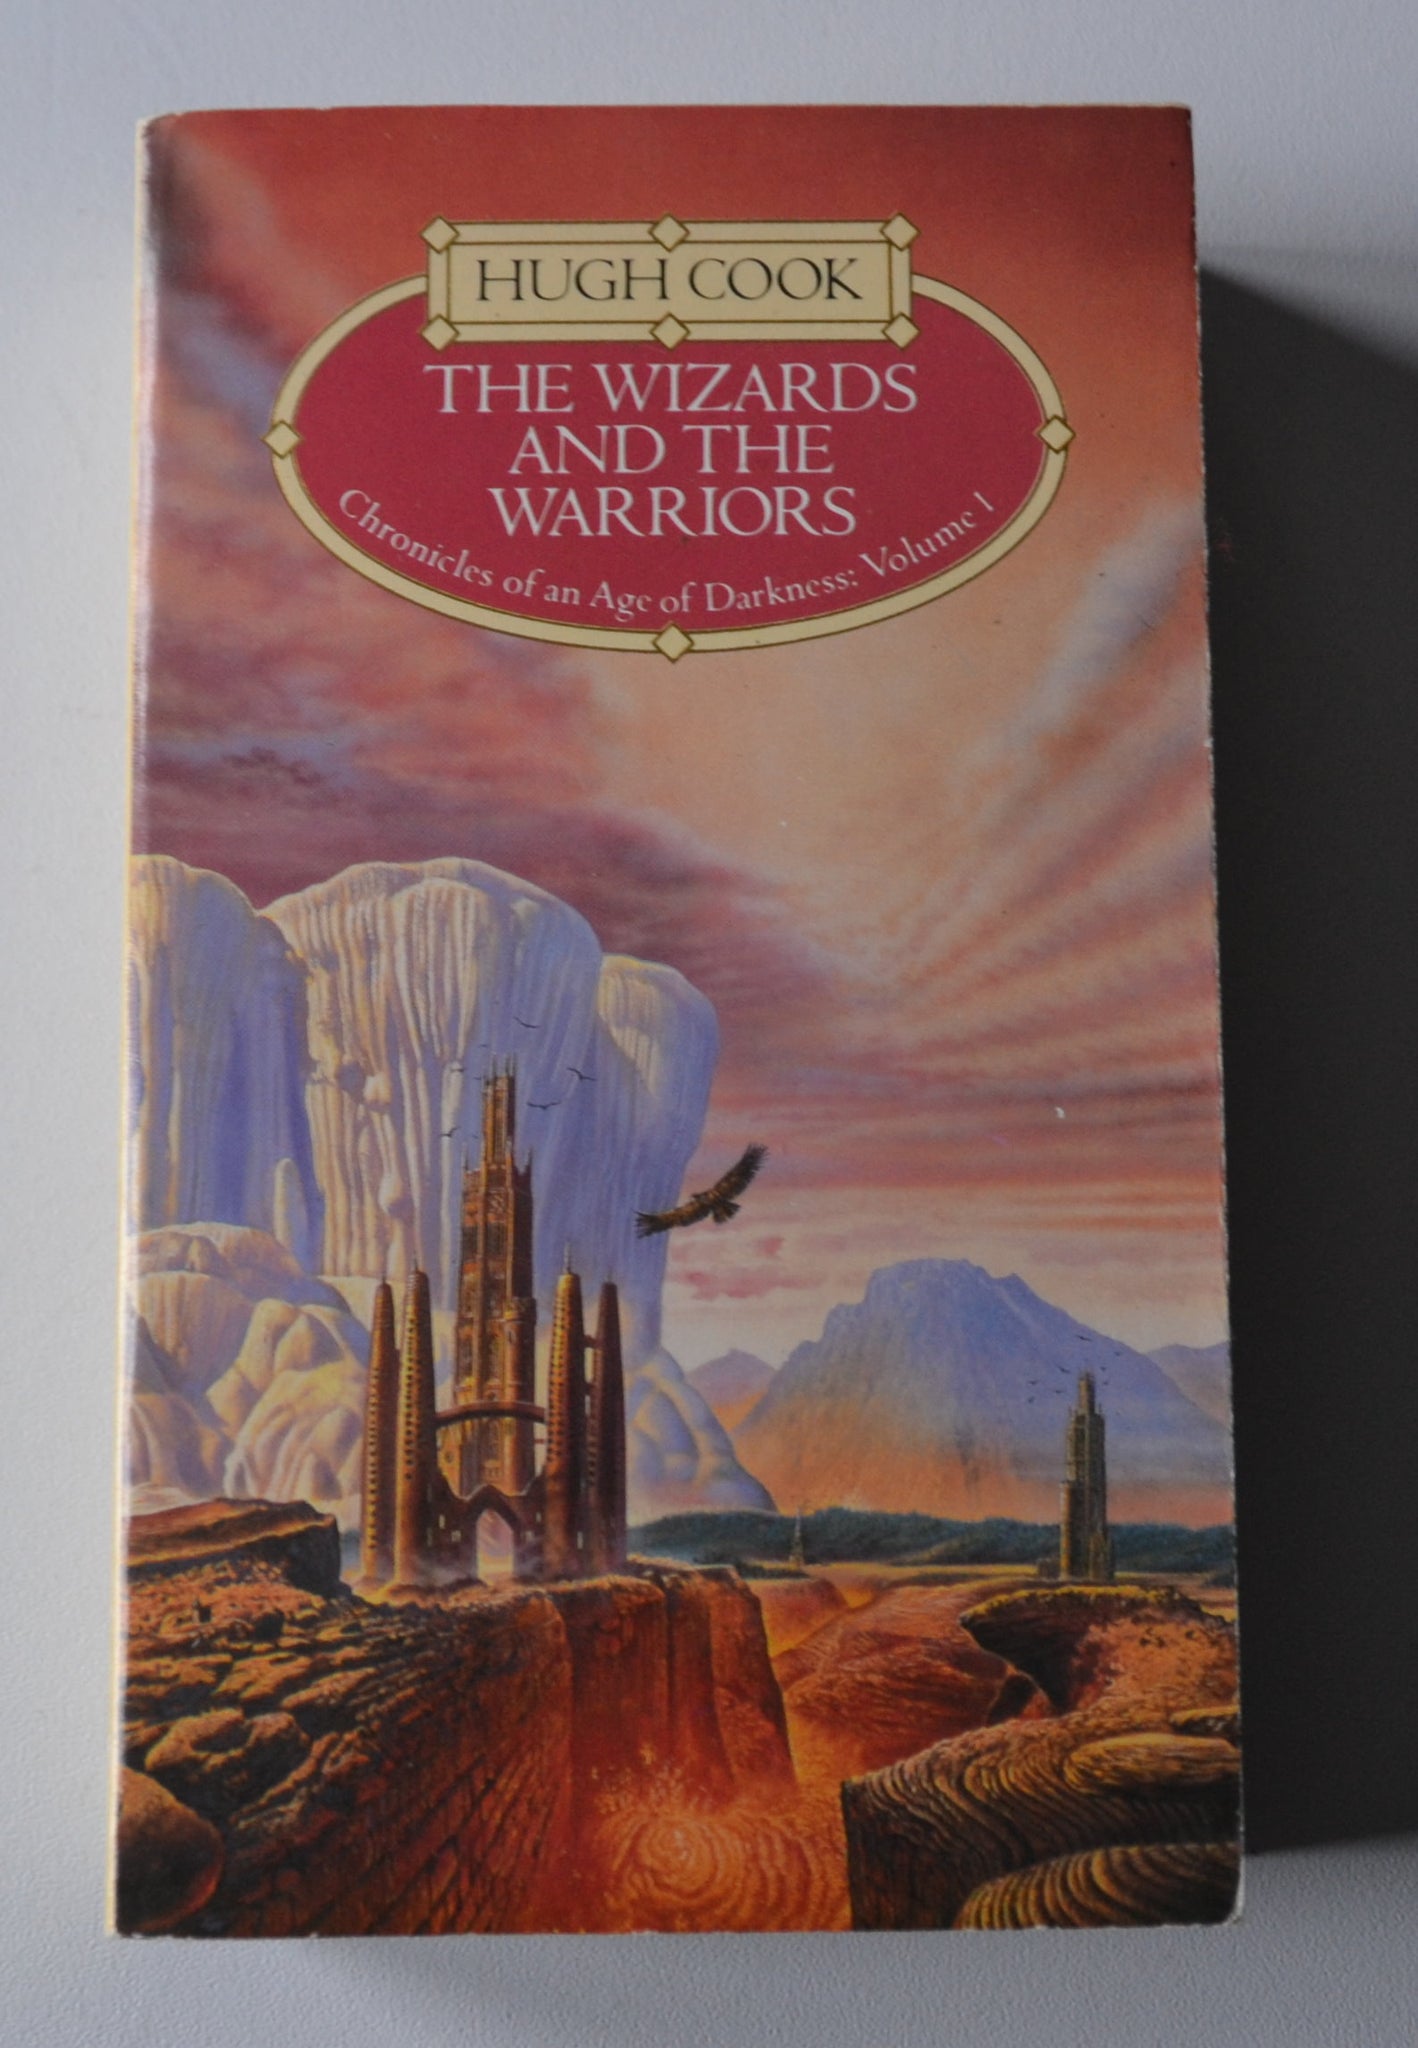 The Wizards and the Warriors - Chronicles of an Age of Darkness Book 1